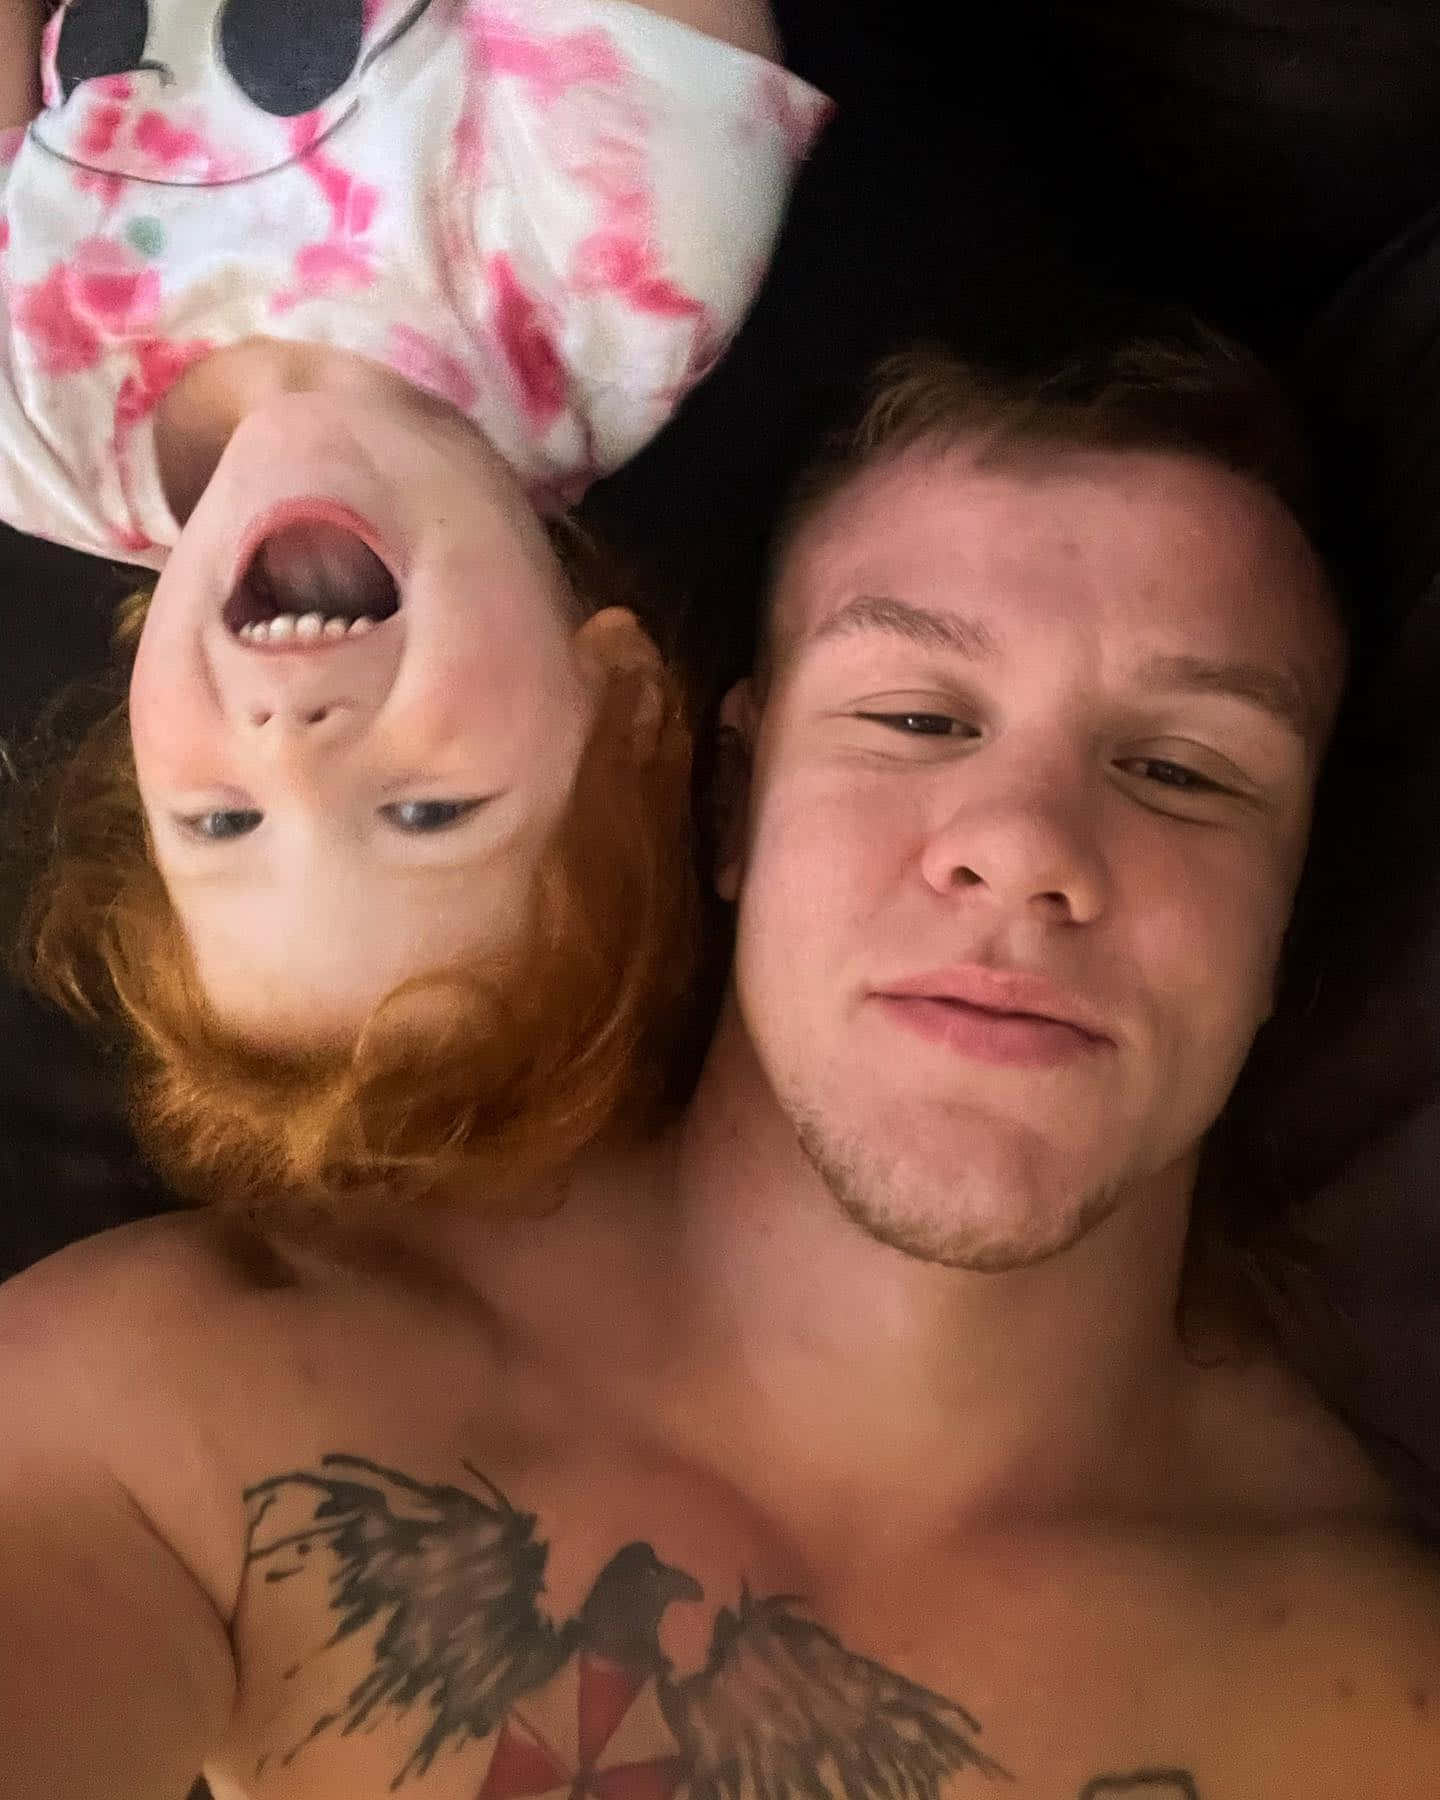 UFC Fighter Jimmy Crute With Smiling Child Wallpaper